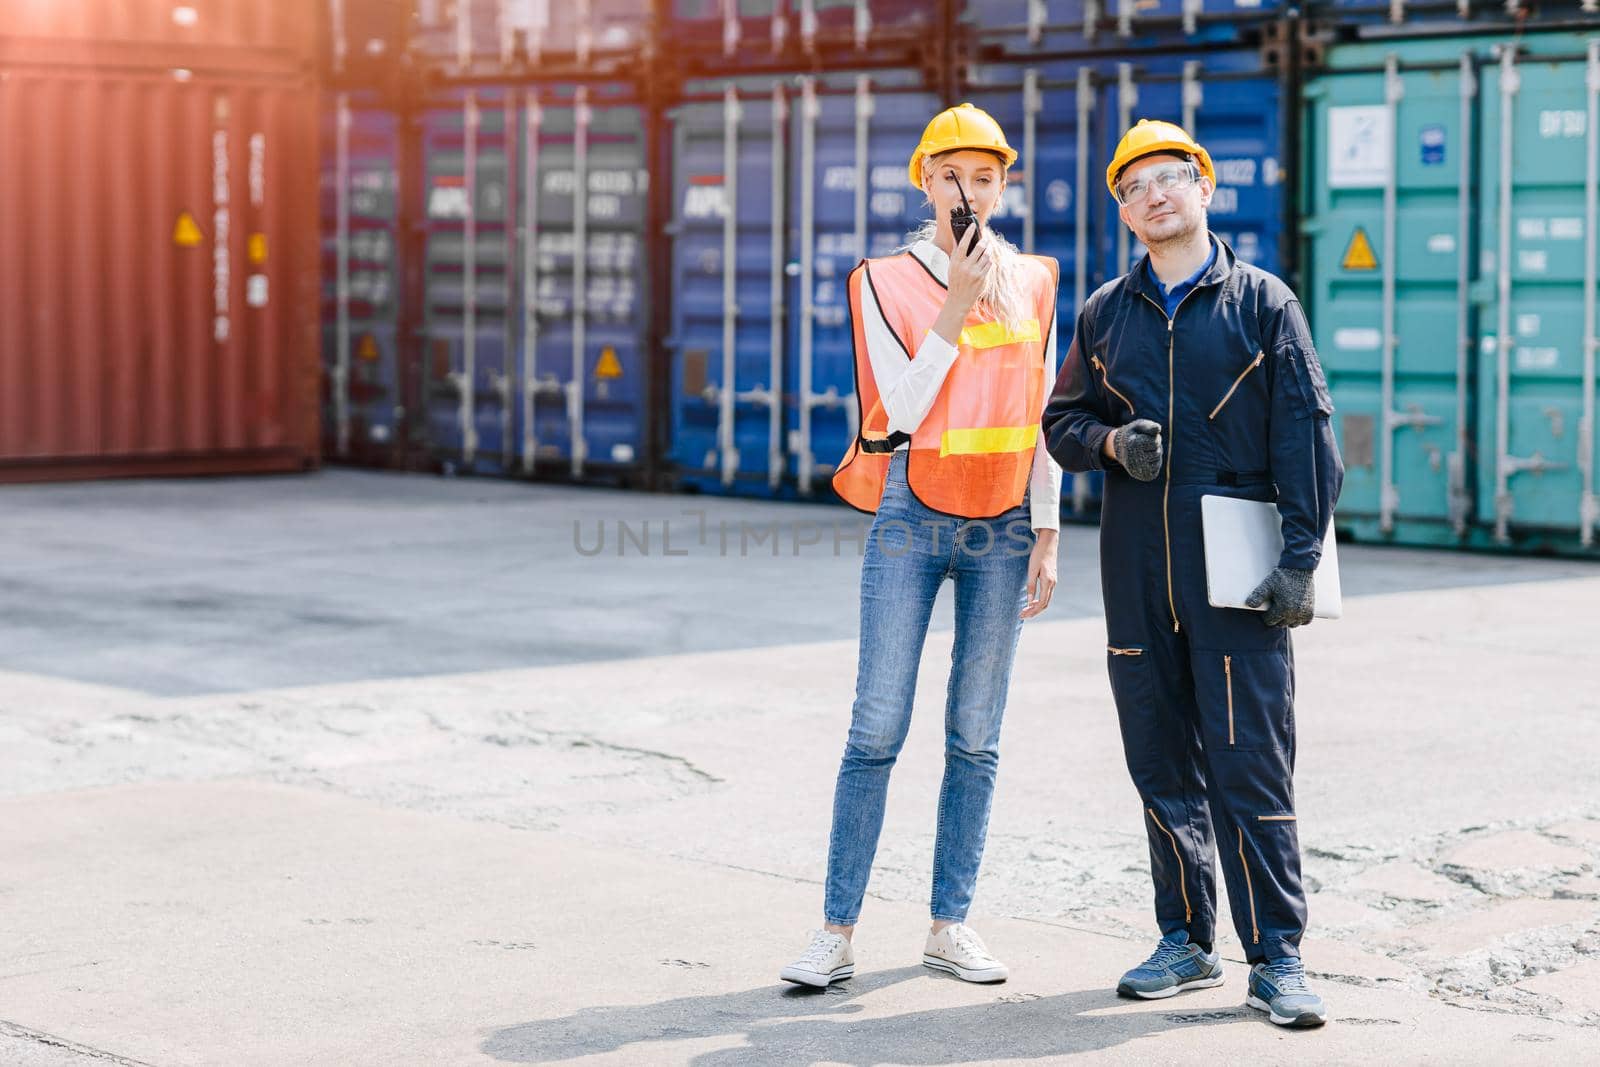 logistic worker man and woman working team with radio control loading containers at port cargo to trucks for export and import goods. by qualitystocks